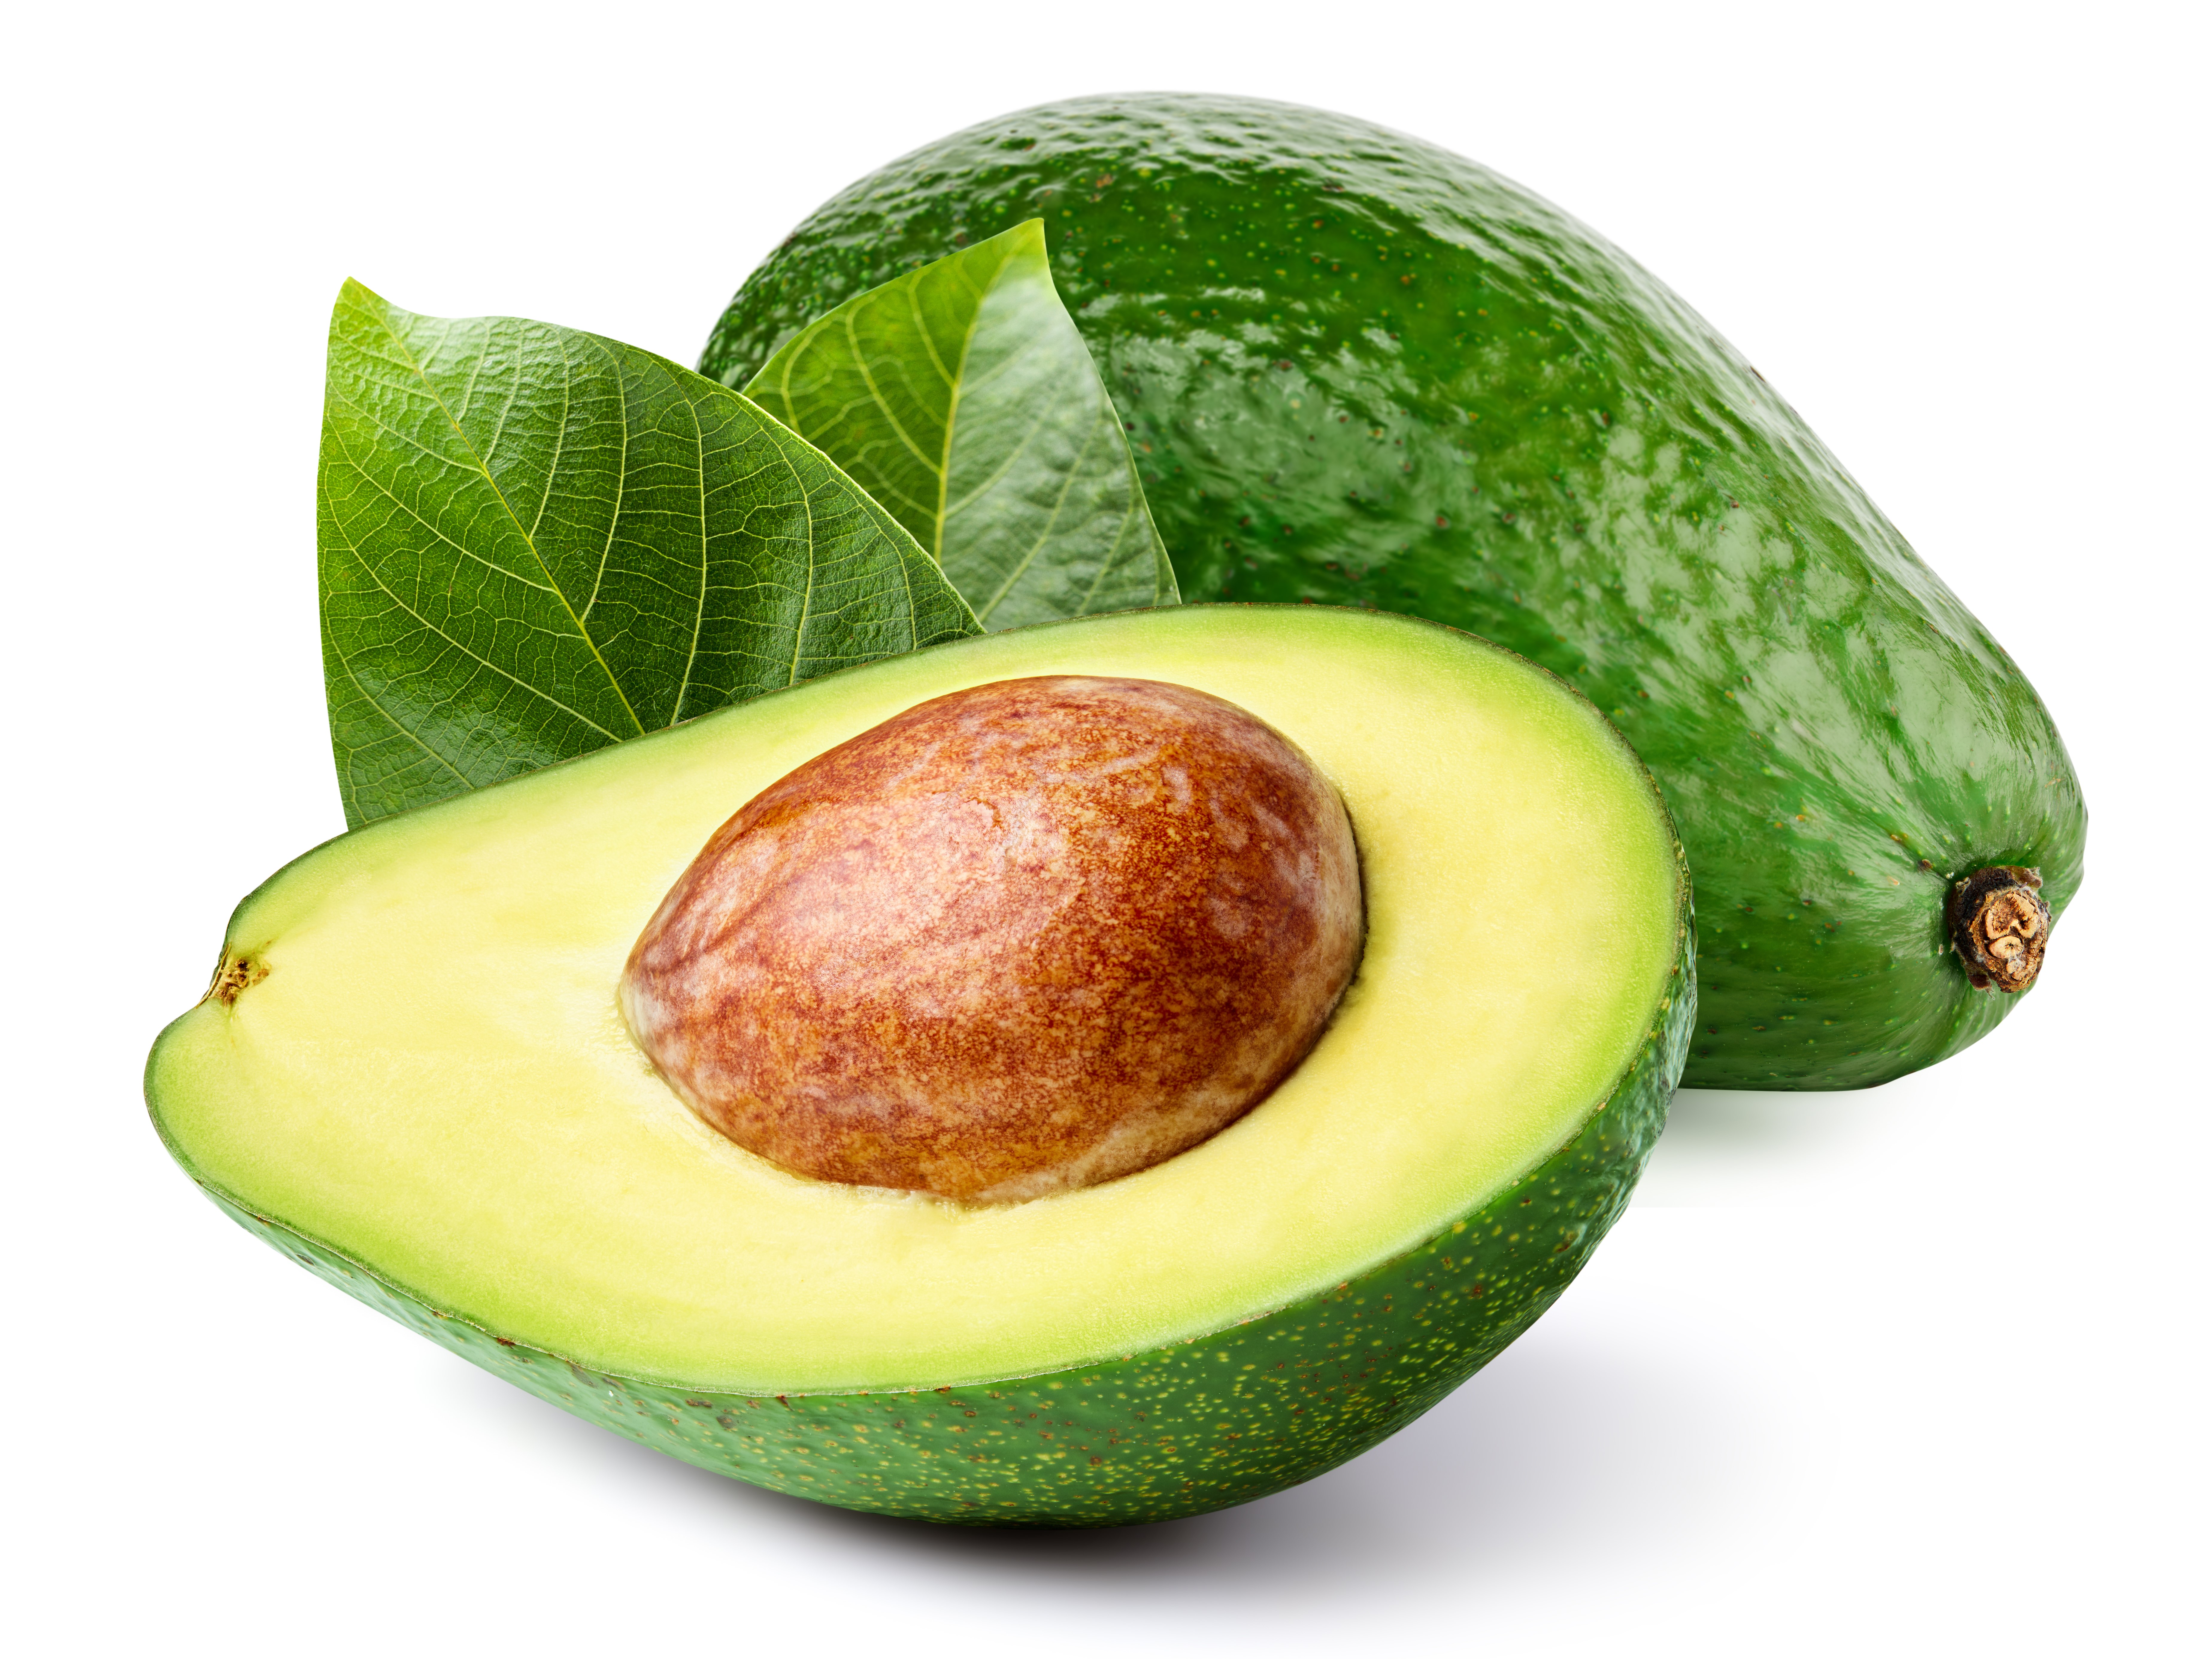 Costa Group’s Lovacado-branded avocados now have QR codes embedded in their stickers, enabling the company - and consumers - to track each avo’s path from farm gate to packing shed to plate.